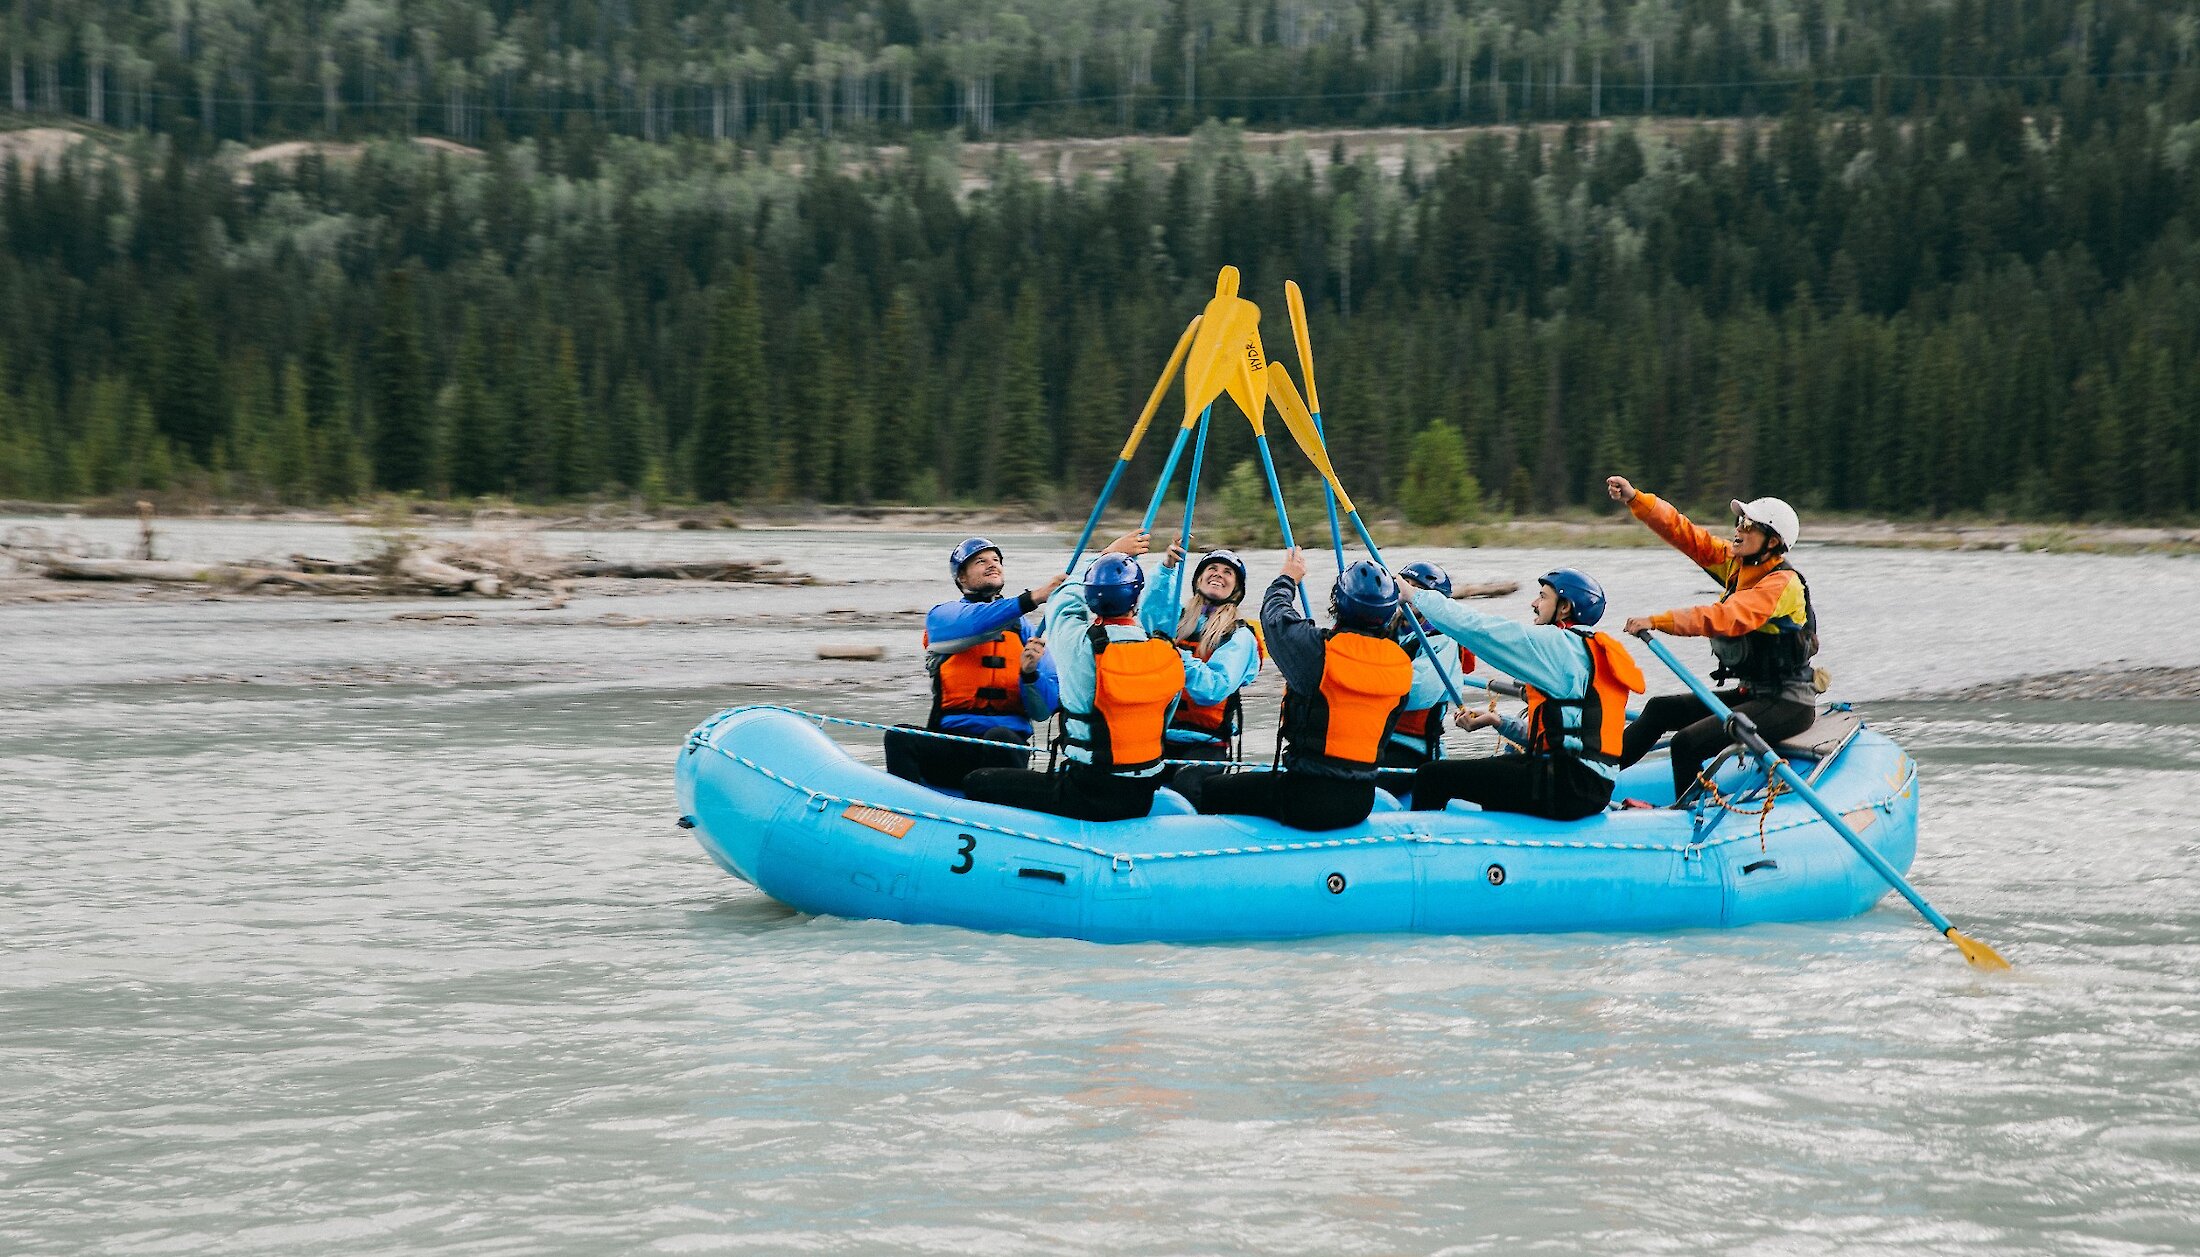 Rafters getting ready to hit the rapids of the Kicking Horse River